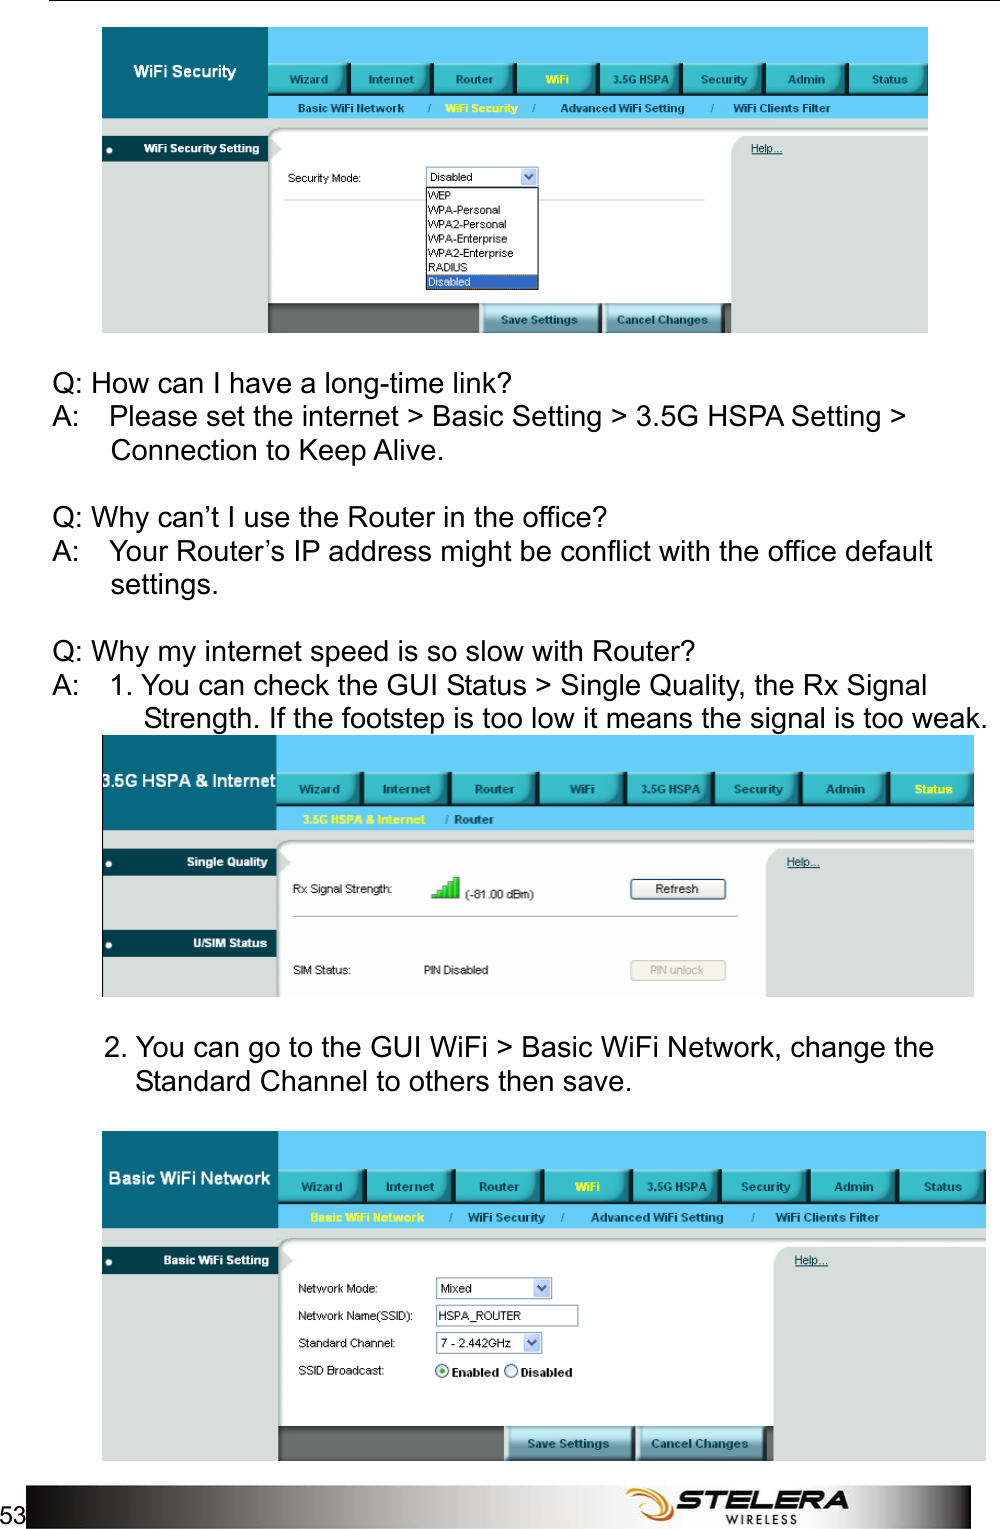  Appendix A: FAQ 53    Q: How can I have a long-time link?   A:    Please set the internet &gt; Basic Setting &gt; 3.5G HSPA Setting &gt; Connection to Keep Alive.     Q: Why can’t I use the Router in the office?   A:    Your Router’s IP address might be conflict with the office default settings.    Q: Why my internet speed is so slow with Router?   A:    1. You can check the GUI Status &gt; Single Quality, the Rx Signal Strength. If the footstep is too low it means the signal is too weak.            2. You can go to the GUI WiFi &gt; Basic WiFi Network, change the Standard Channel to others then save.      